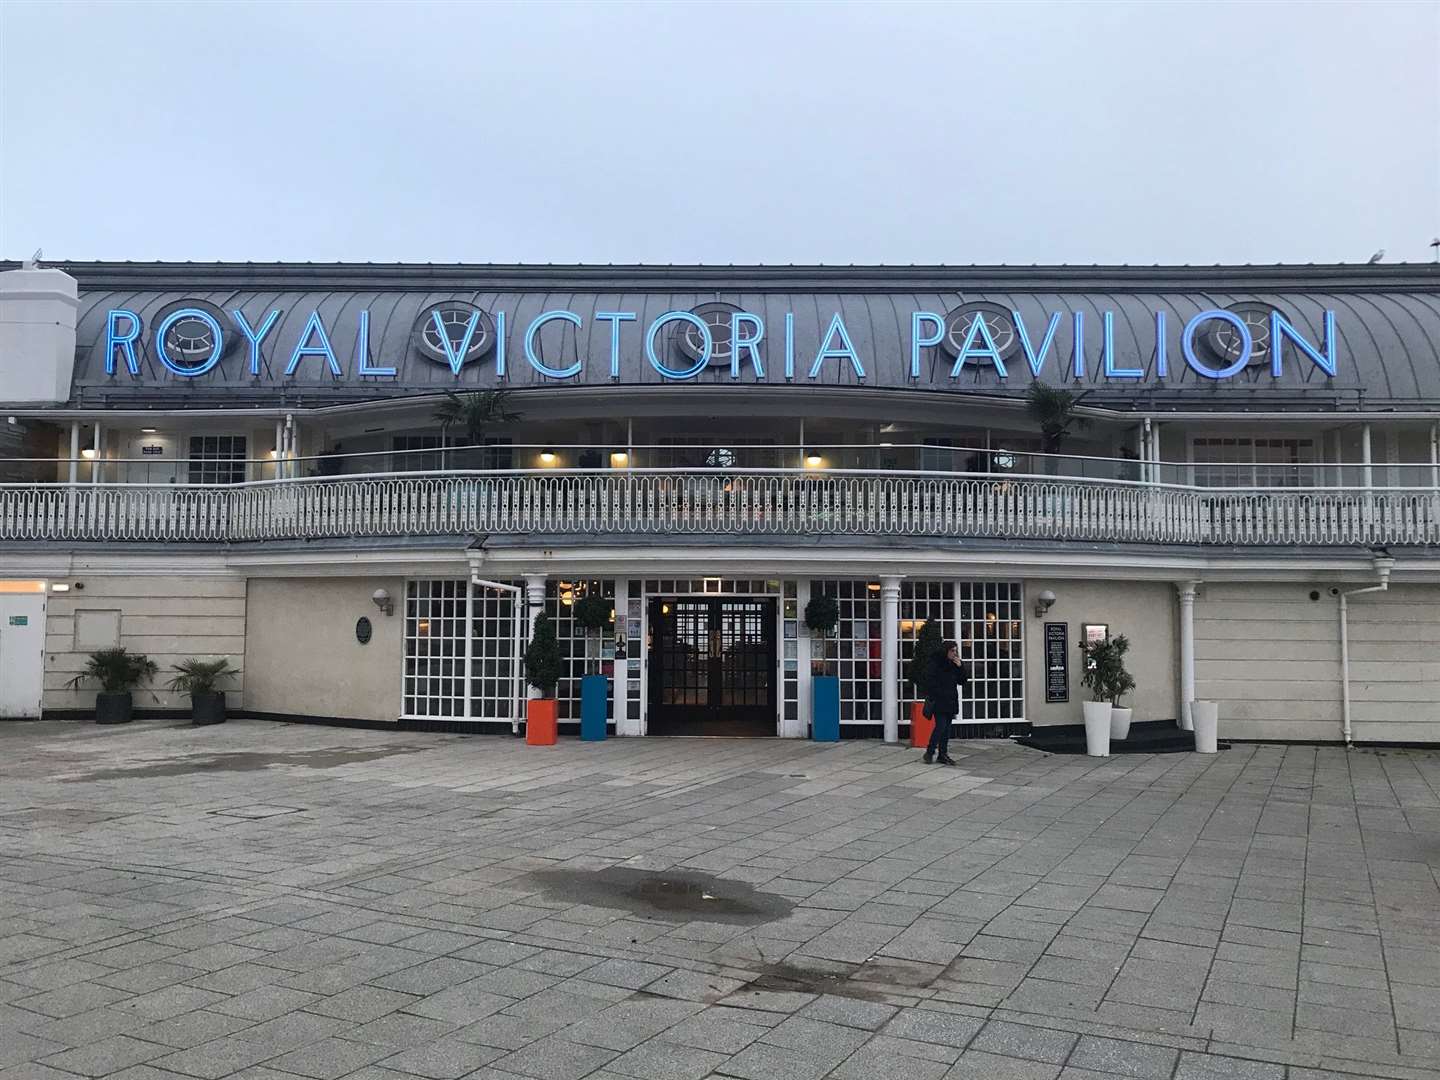 The Royal Victoria Pavilion in Ramsgate - one of the UK’s biggest Spoons